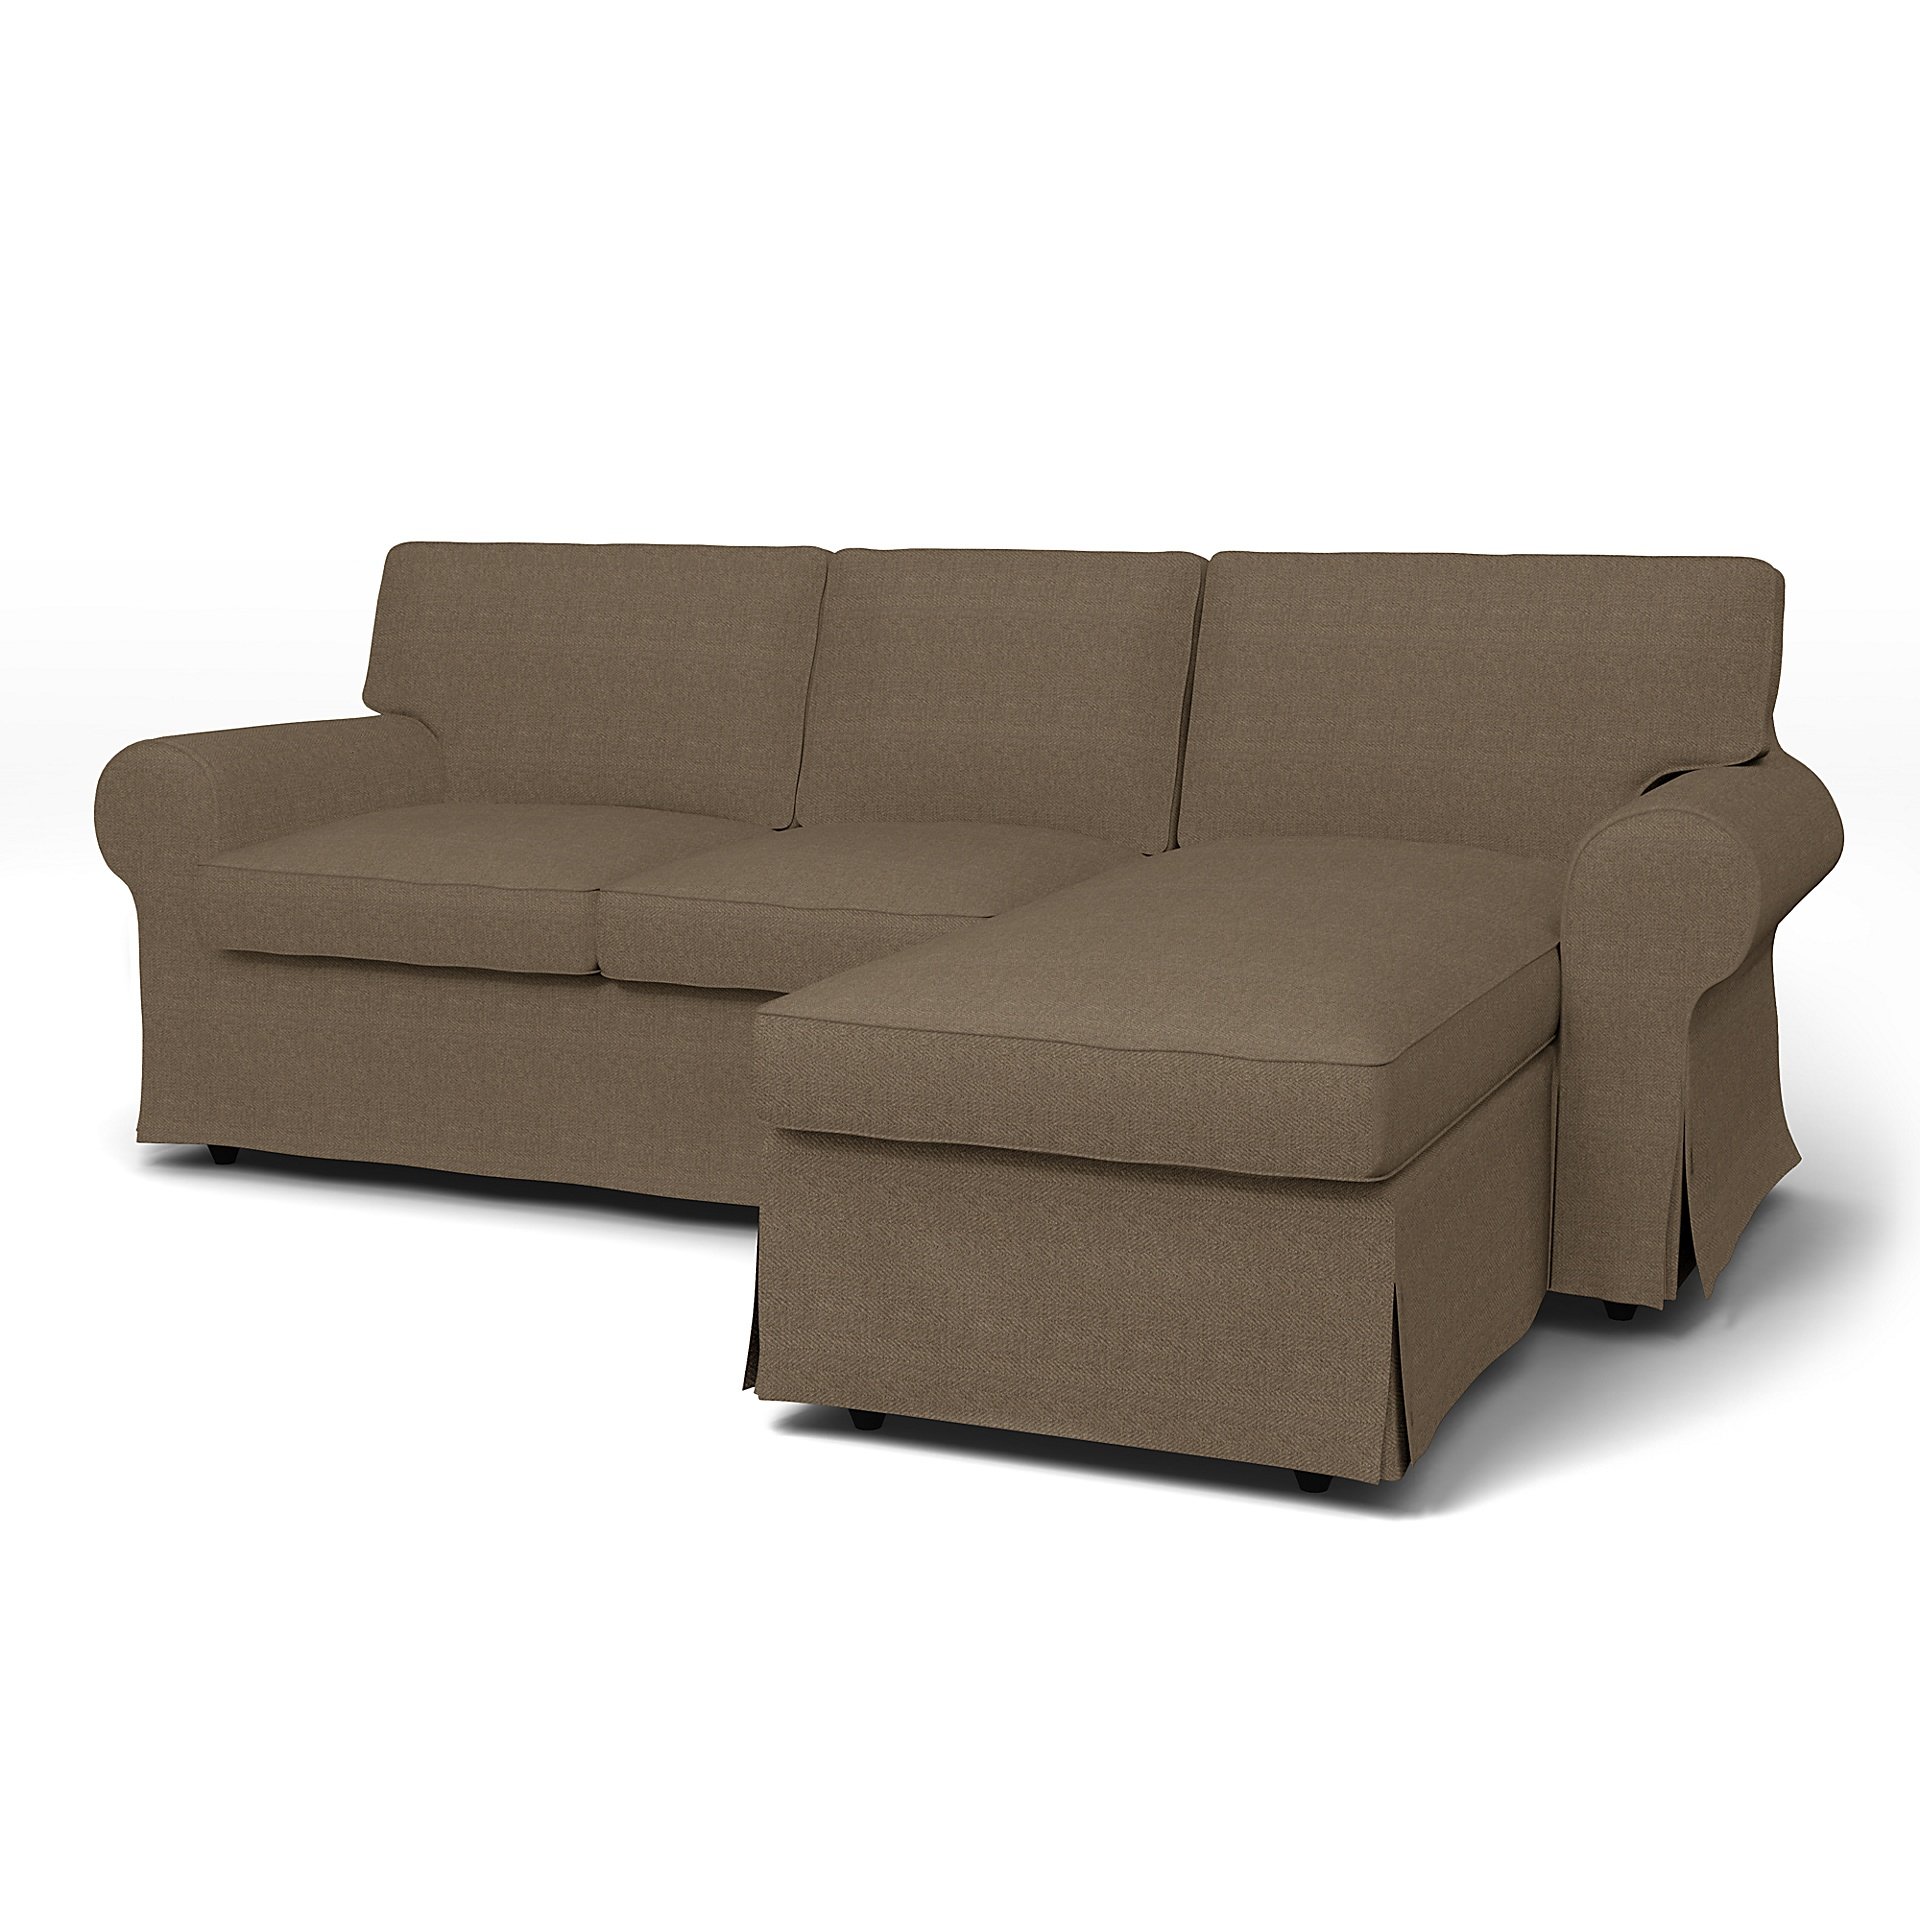 IKEA - Ektorp 3 Seater Sofa with Chaise Cover, Dark Taupe, Boucle & Texture - Bemz